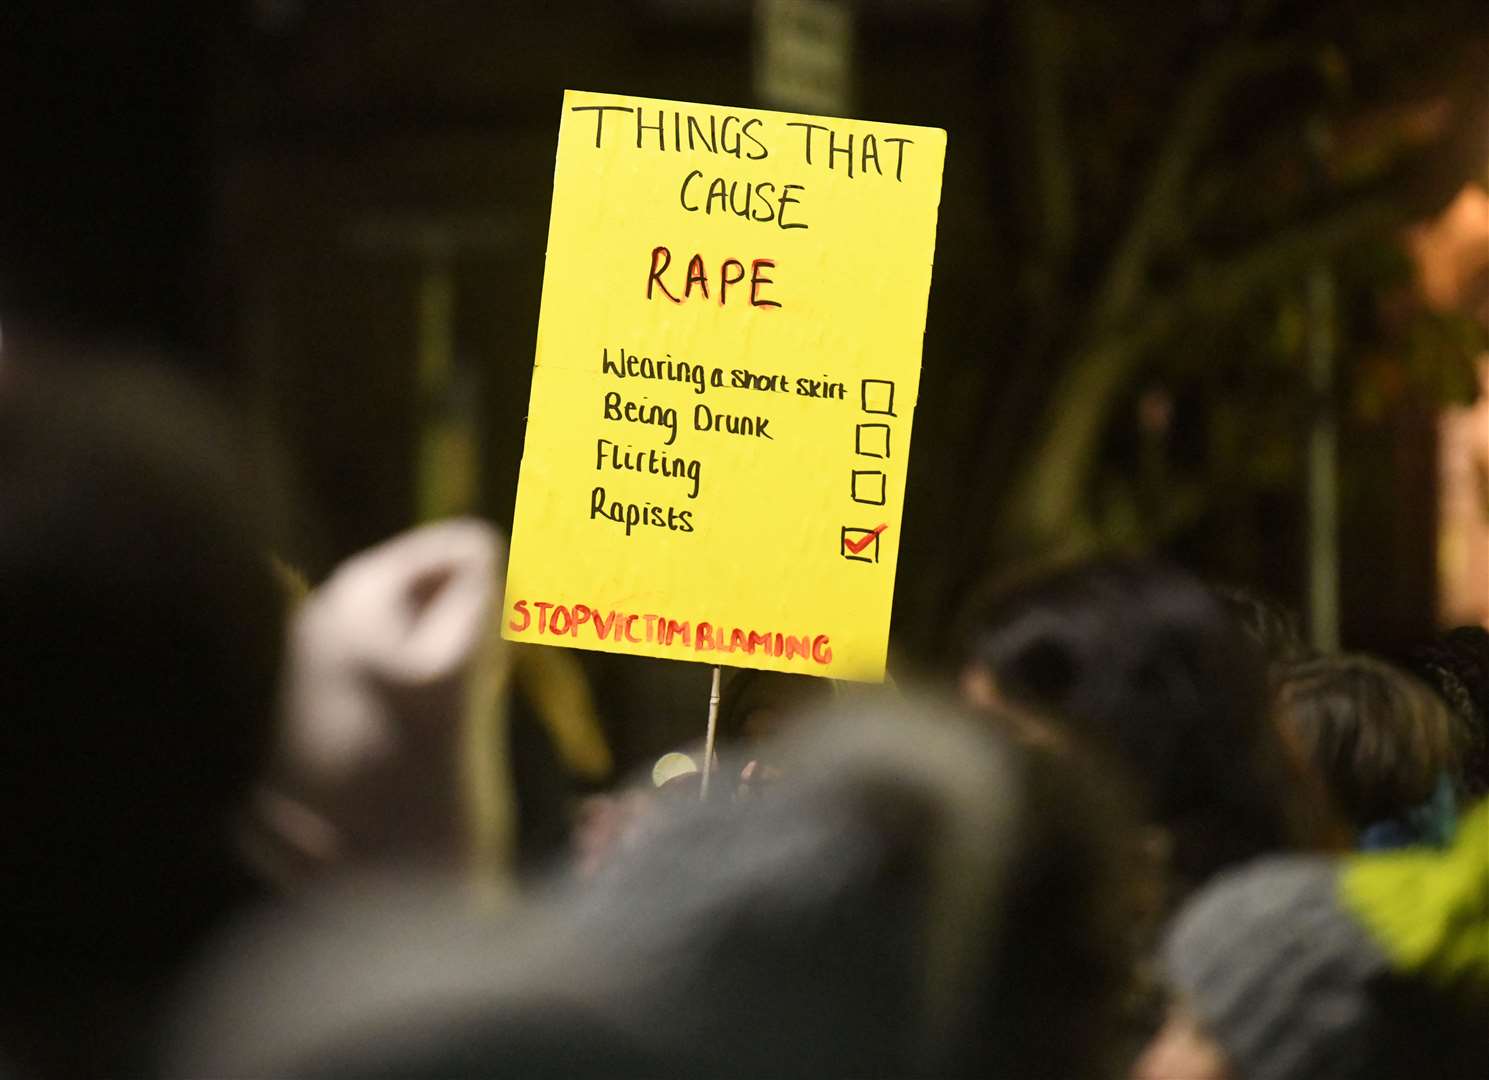 "Things that cause rape: Rapists". Picture: James Mackenzie.